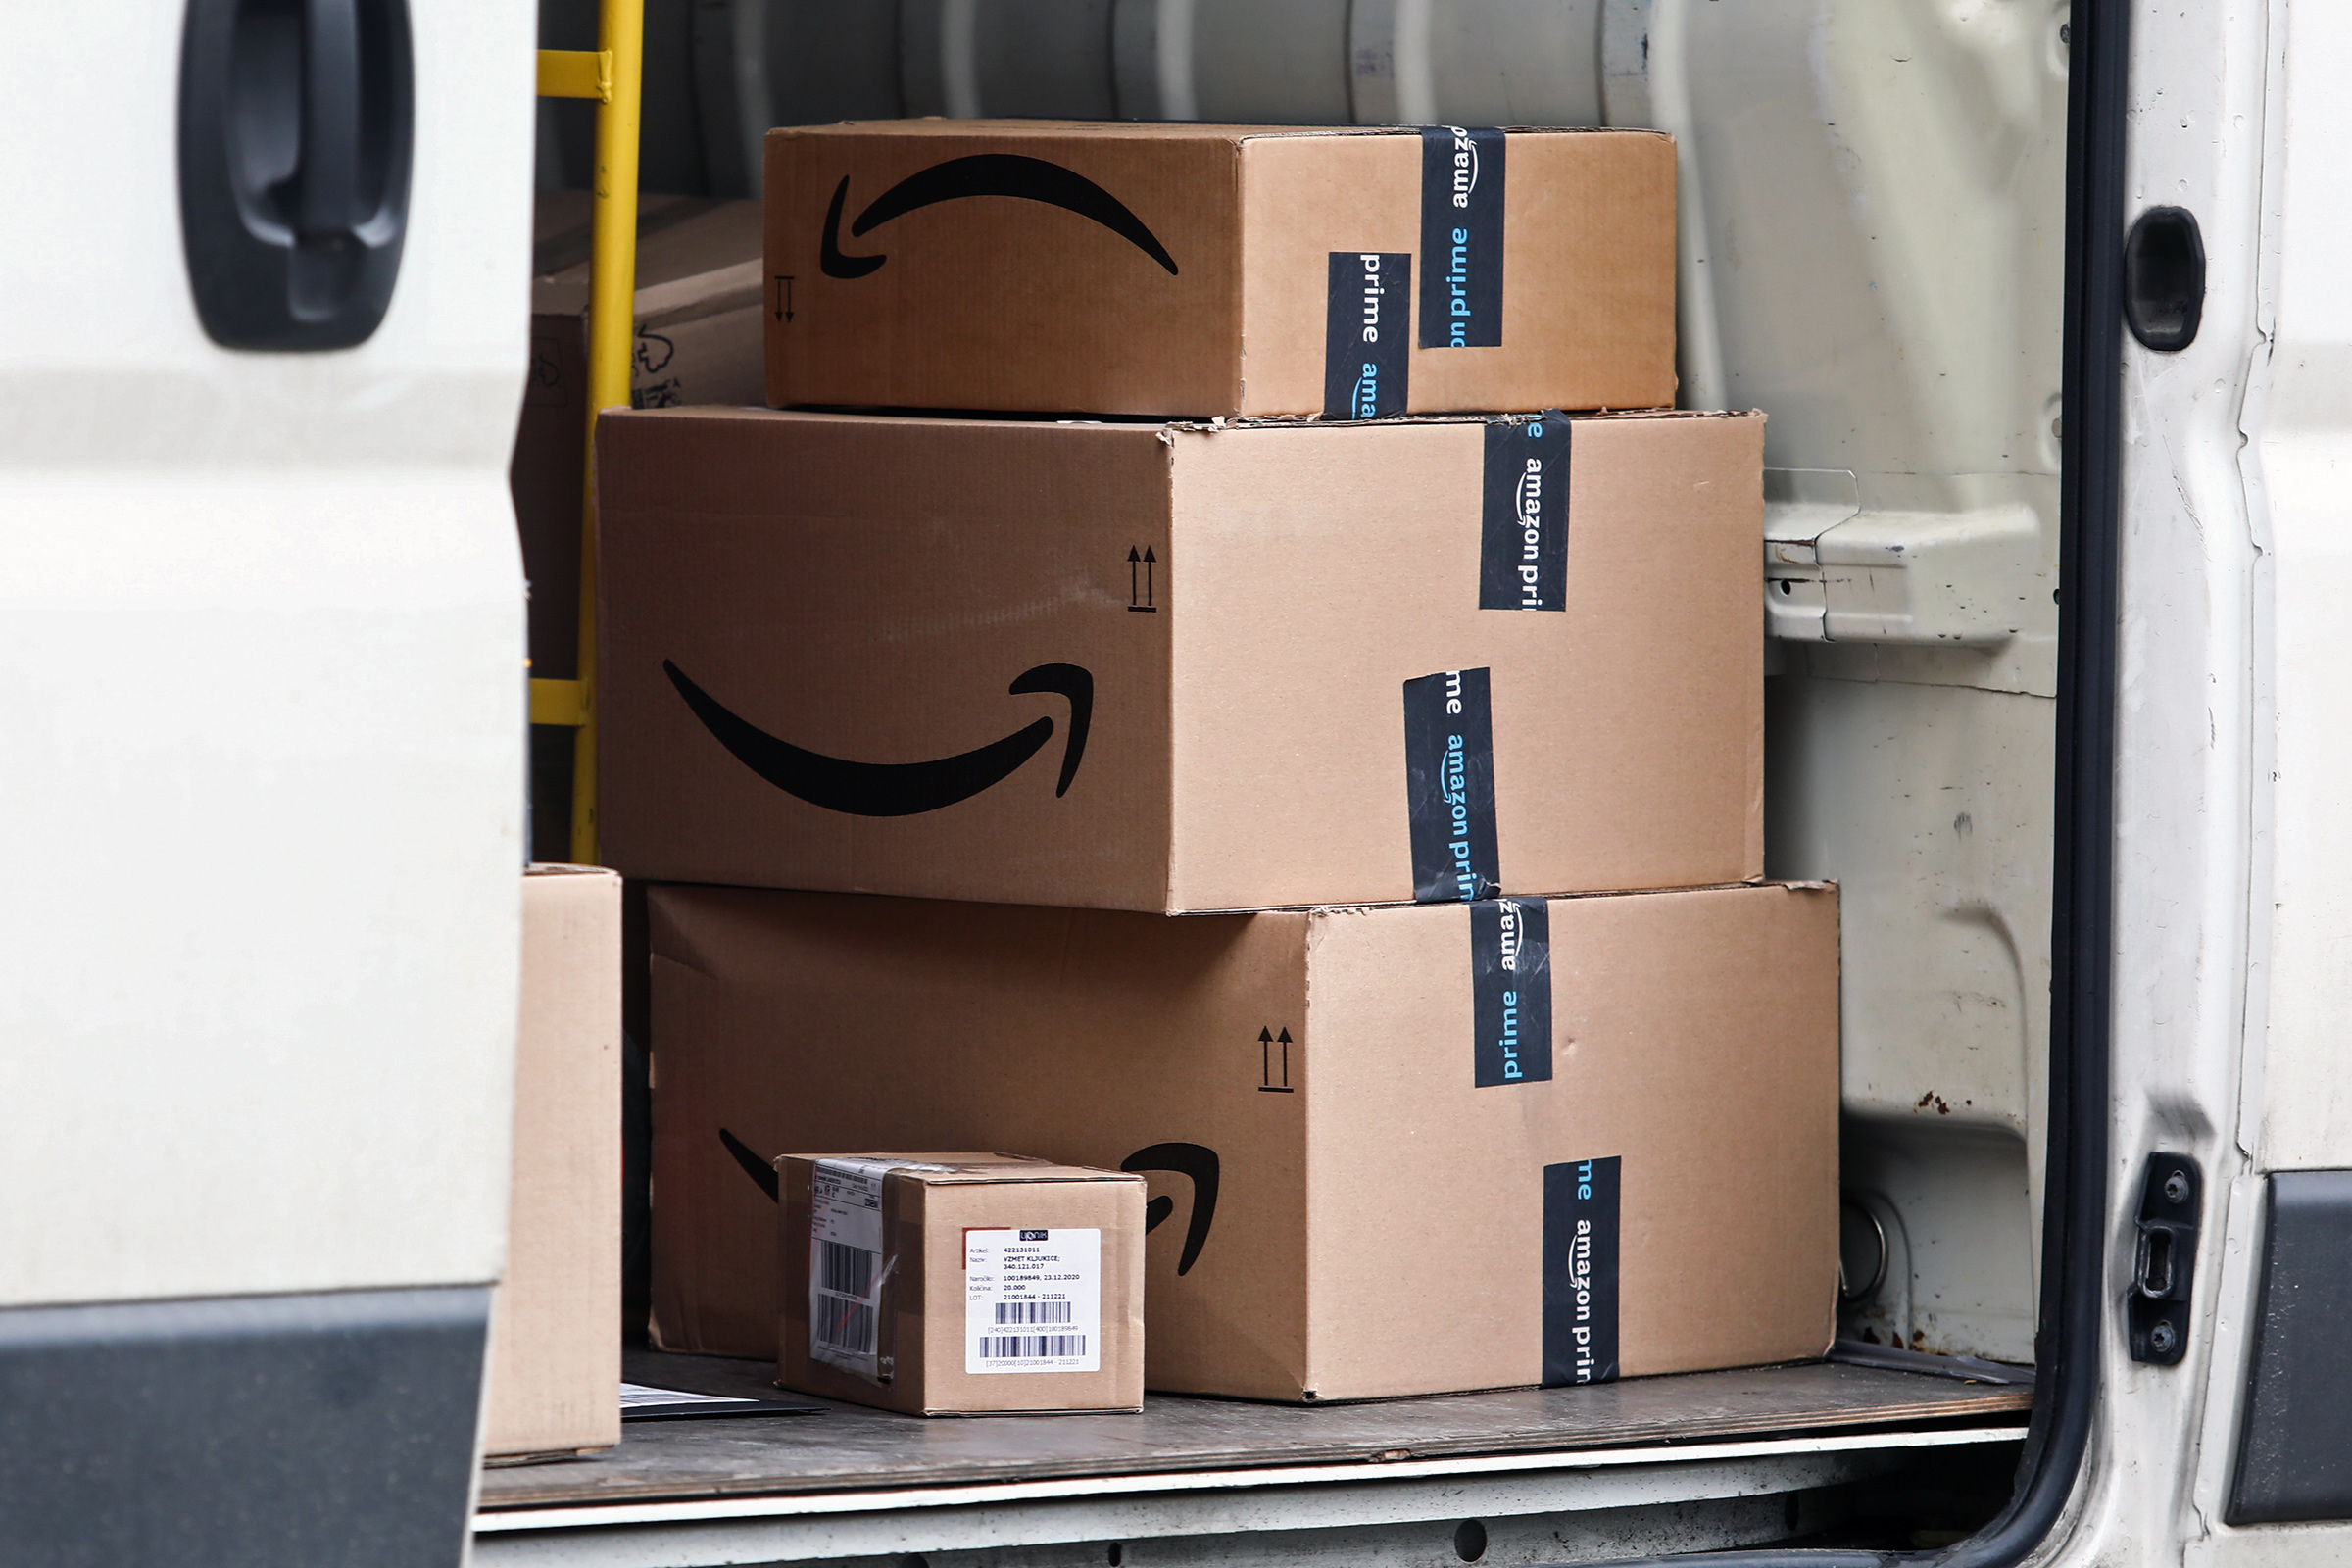 Amazon boxes are seen inside a delivery truck on April 20, 2022. (Jakub Porzycki—NurPhoto/Getty Images)